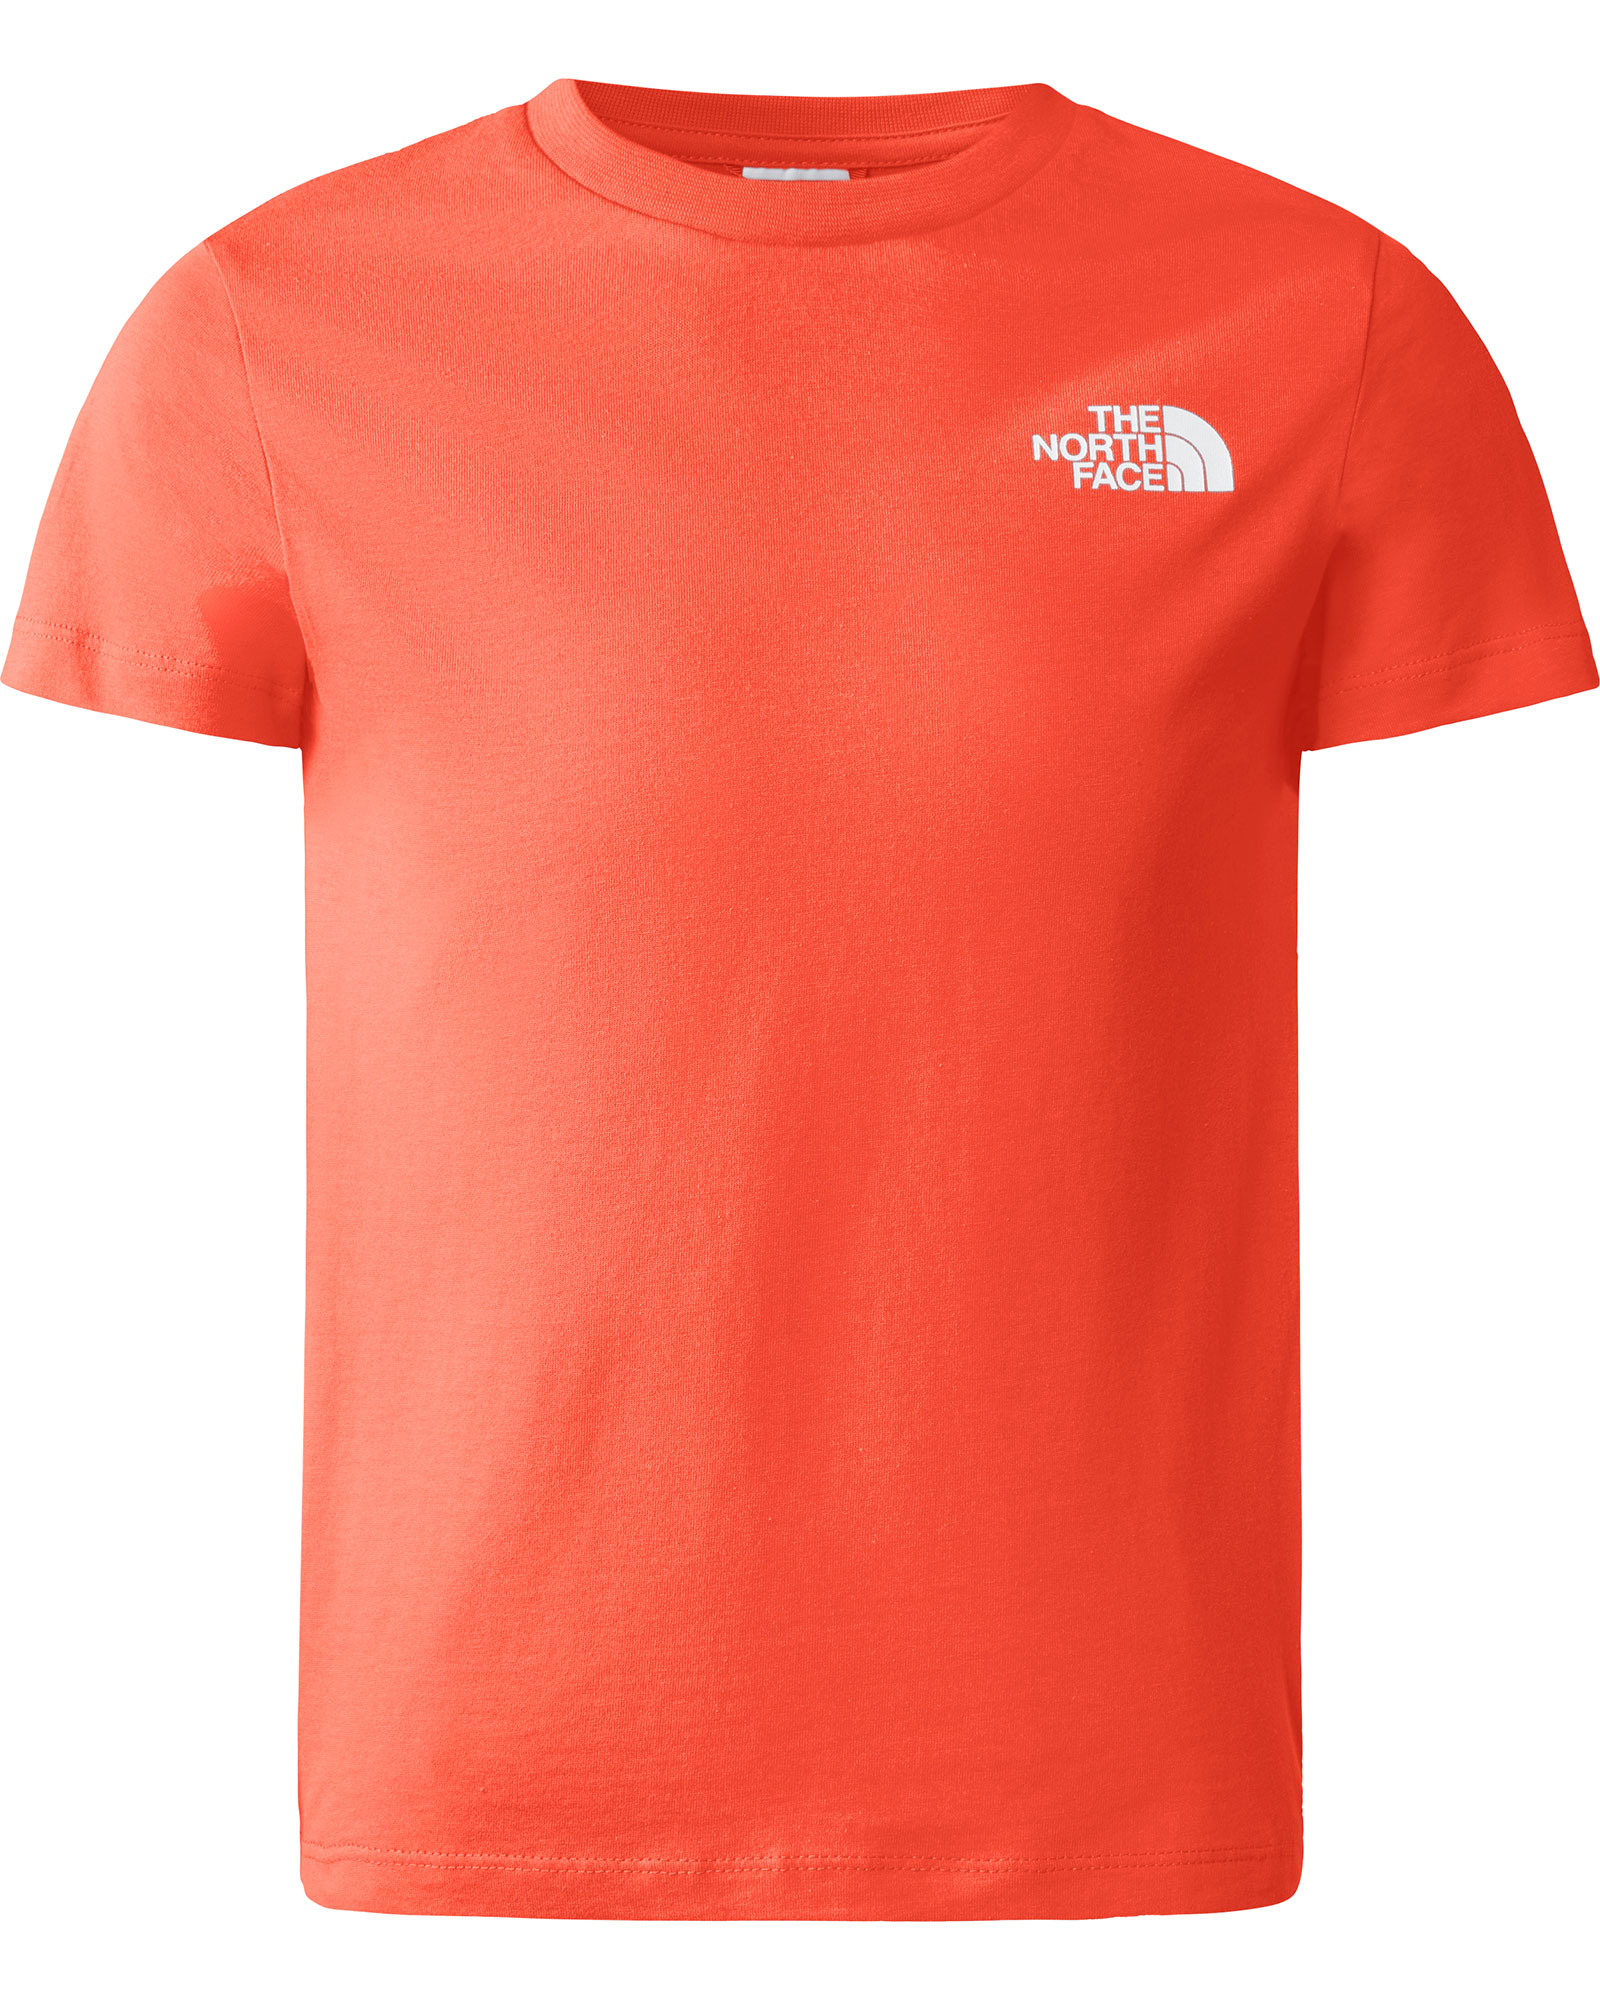 The North Face Youth Simple Dome T Shirt - Retro Orange M